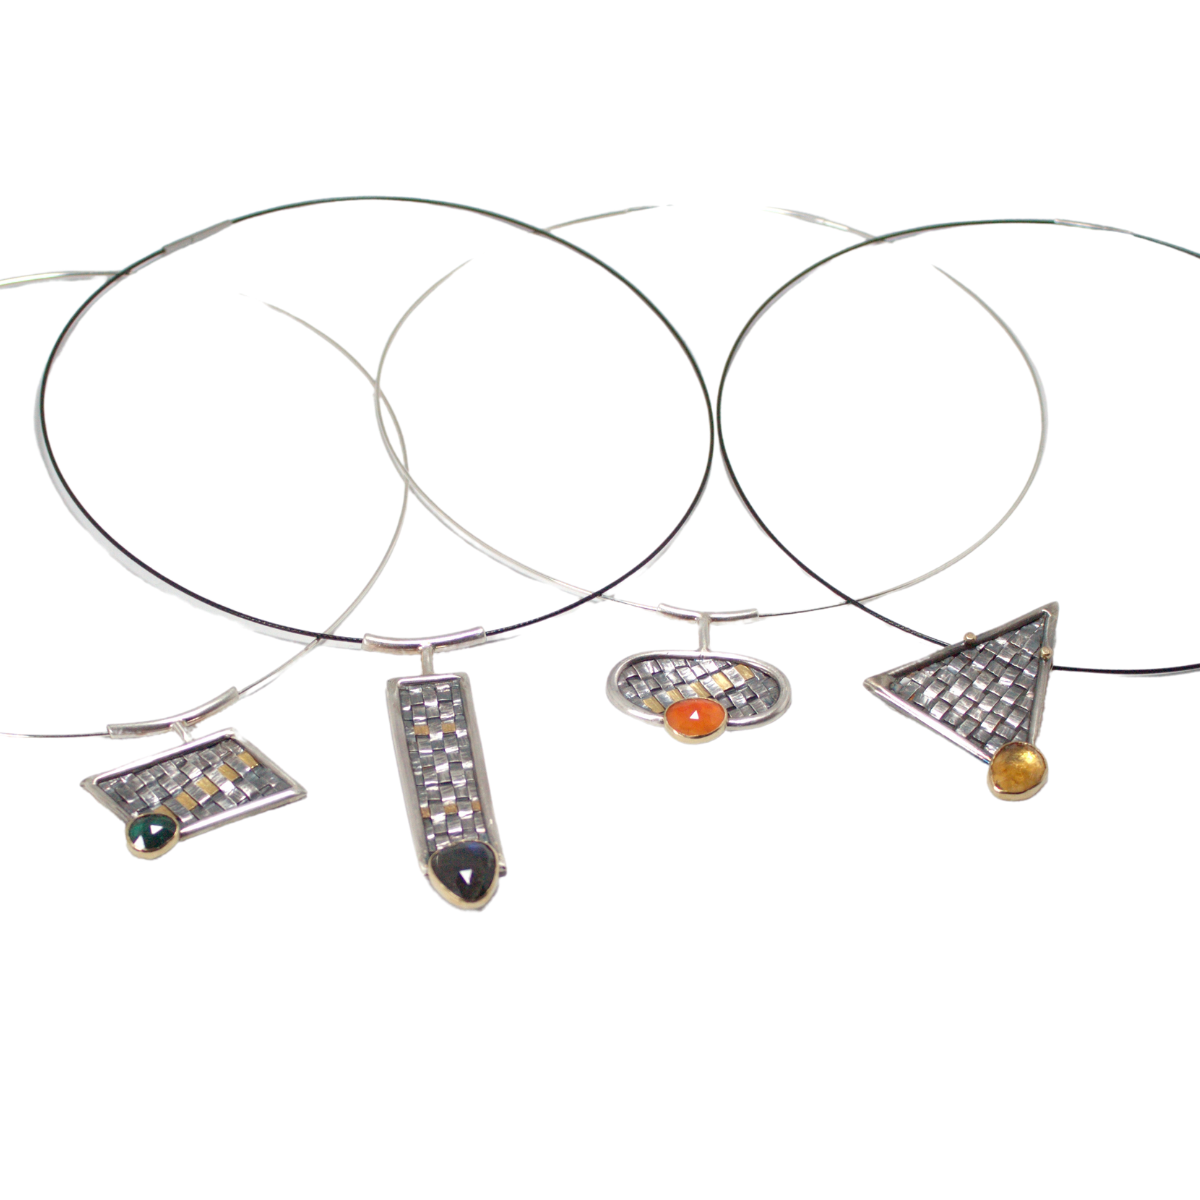 Weft Geometric Necklaces  - Woven fine silver and 22k gold bi-metal with rose cut cab in 18k gold